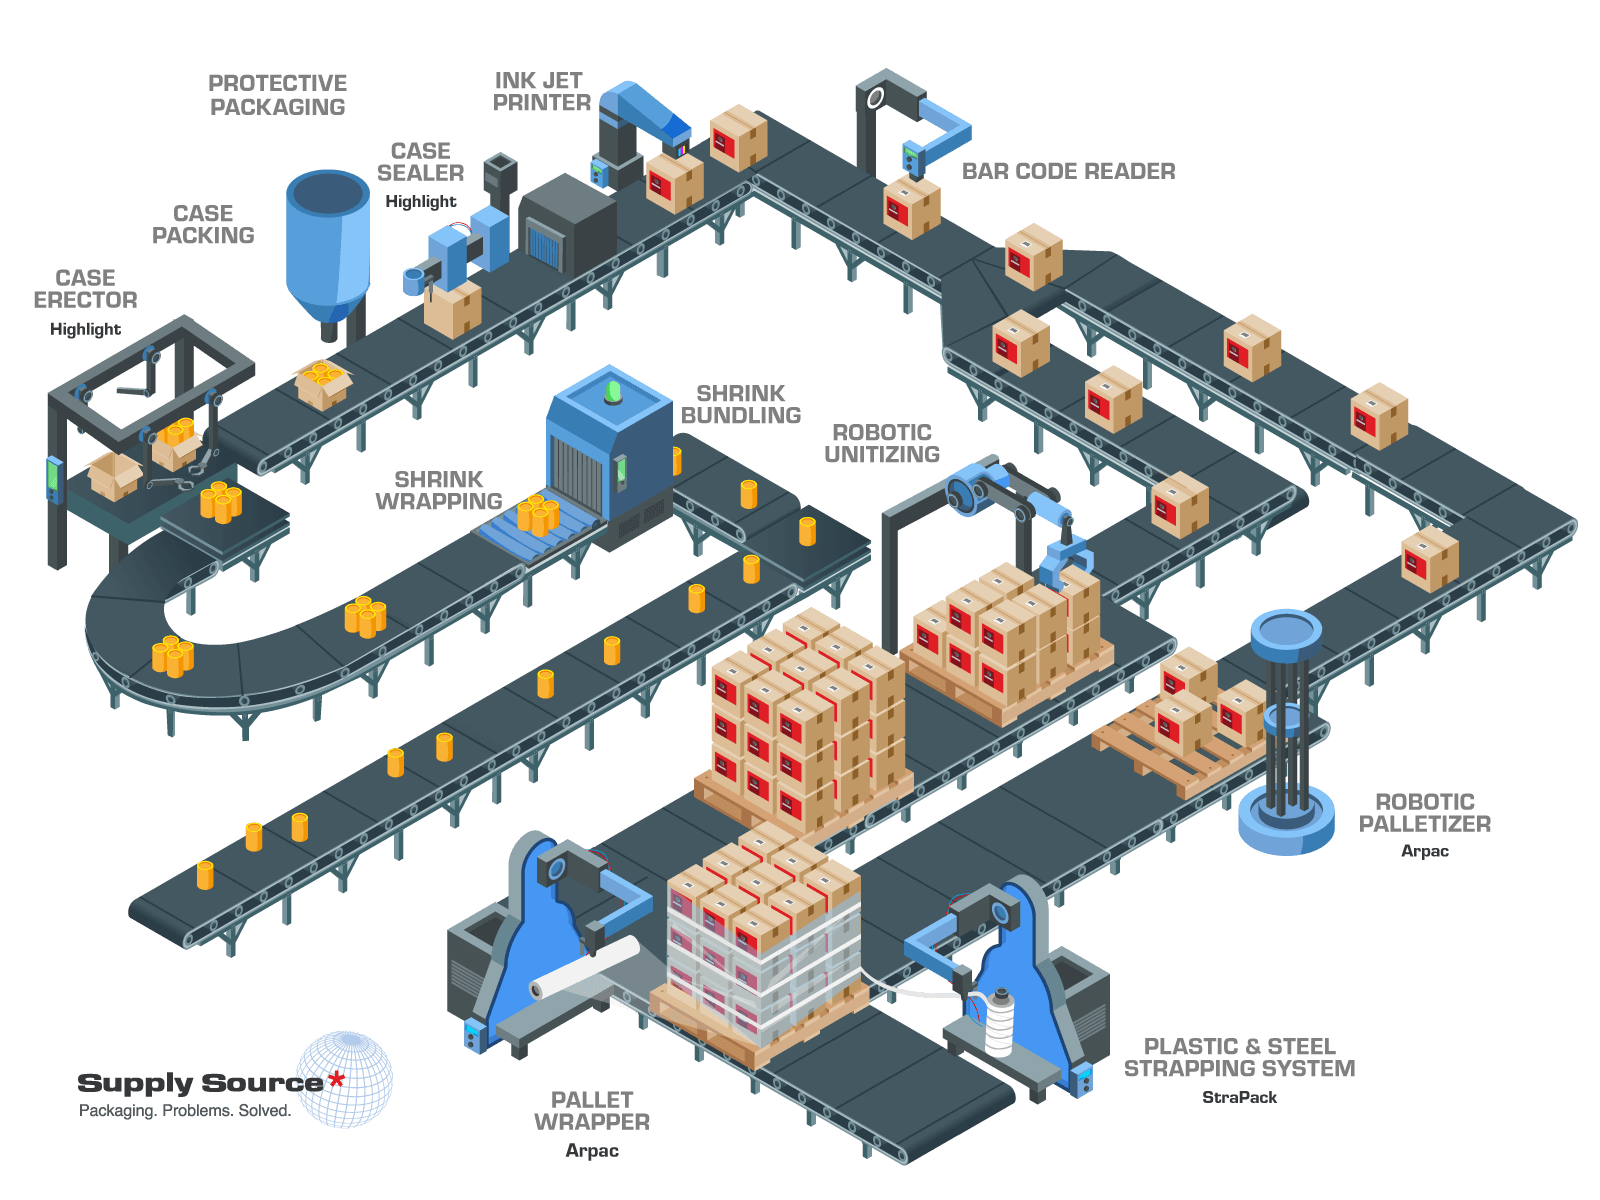 Supply Source Packaging Schematic